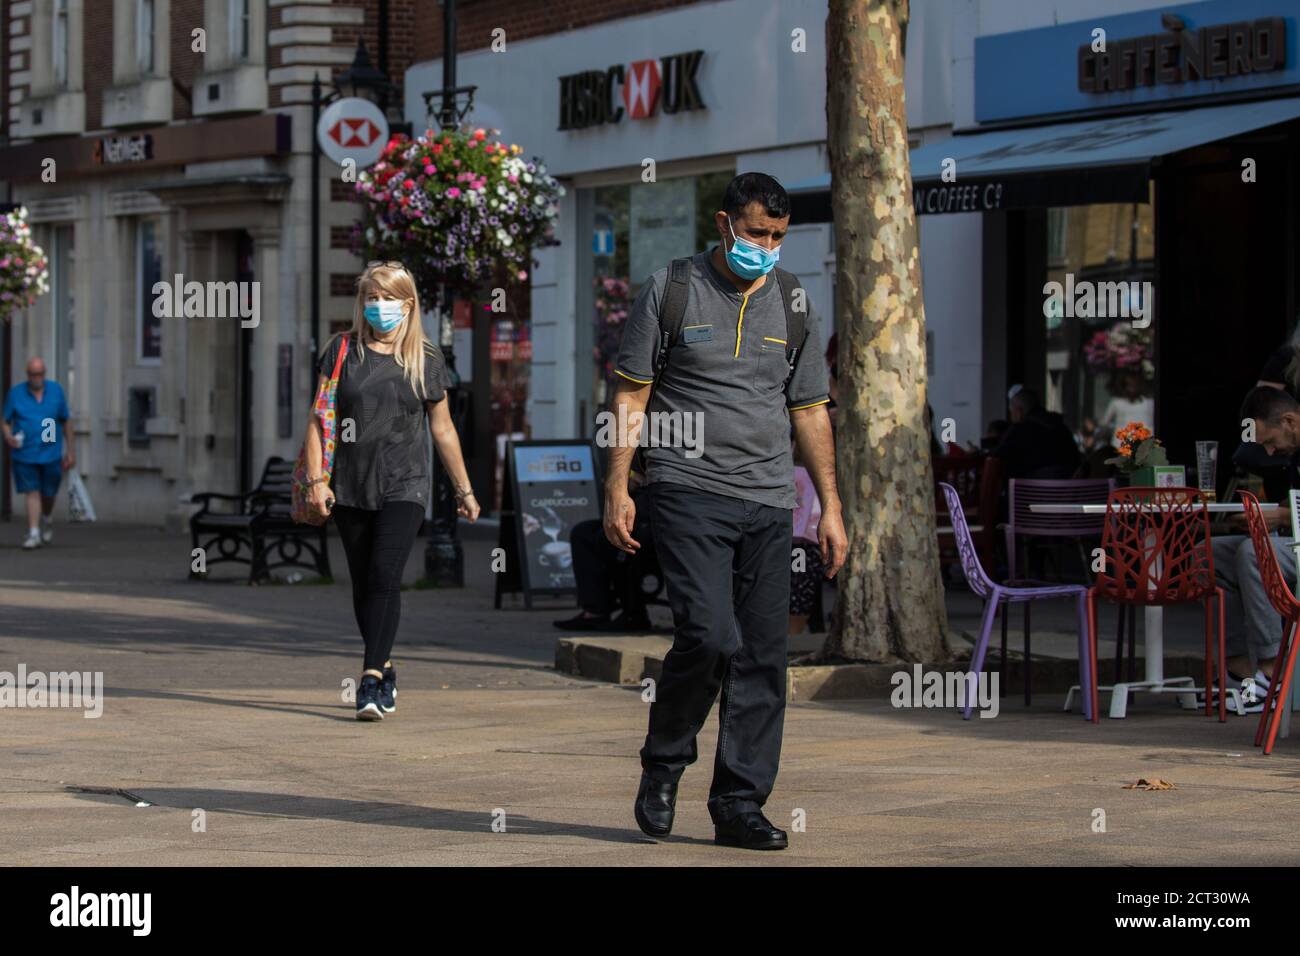 Staines-upon-Thames, UK. 20th September, 2020. Shoppers wear face coverings to help prevent the spread of the coronavirus. The Borough of Spelthorne, of which Staines-upon-Thames forms part along with Ashford, Sunbury-upon-Thames, Stanwell, Shepperton and Laleham, has been declared an Ôarea of concernÕ for COVID-19 by the government following a marked rise in coronavirus infections which is inconsistent with other areas of Surrey. Credit: Mark Kerrison/Alamy Live News Stock Photo